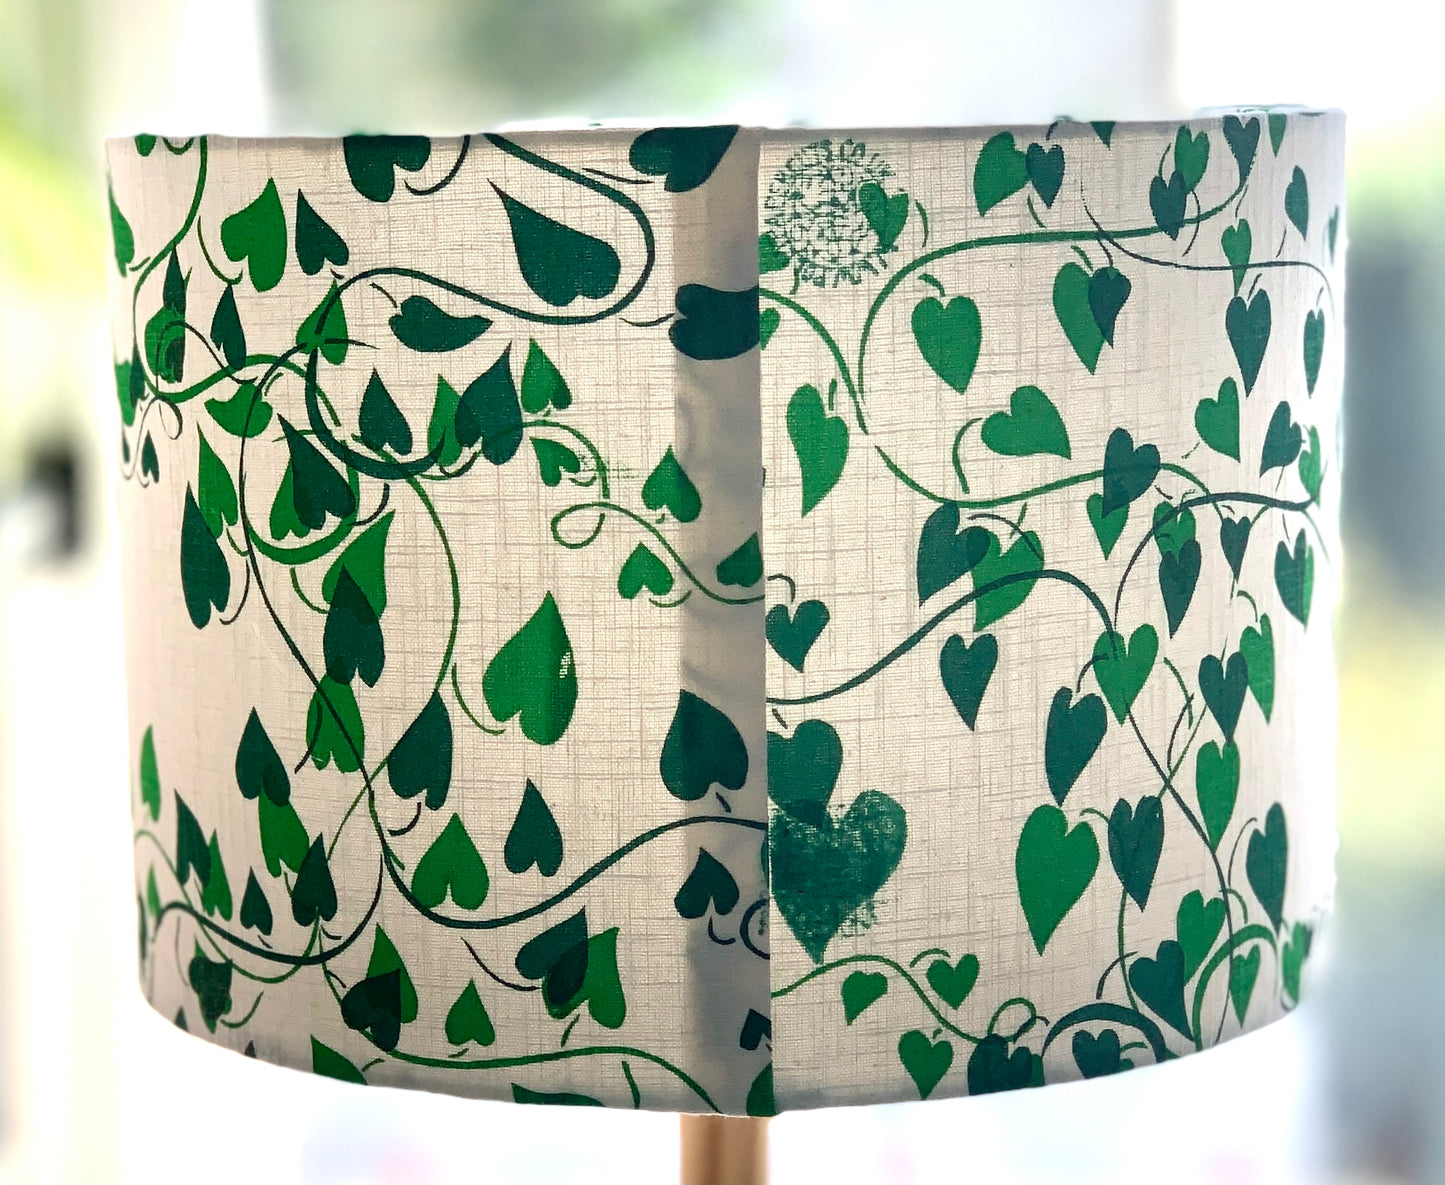 Detail of lampshade with a white linen background and two shades of green convolvulus vines running over it showing seam.